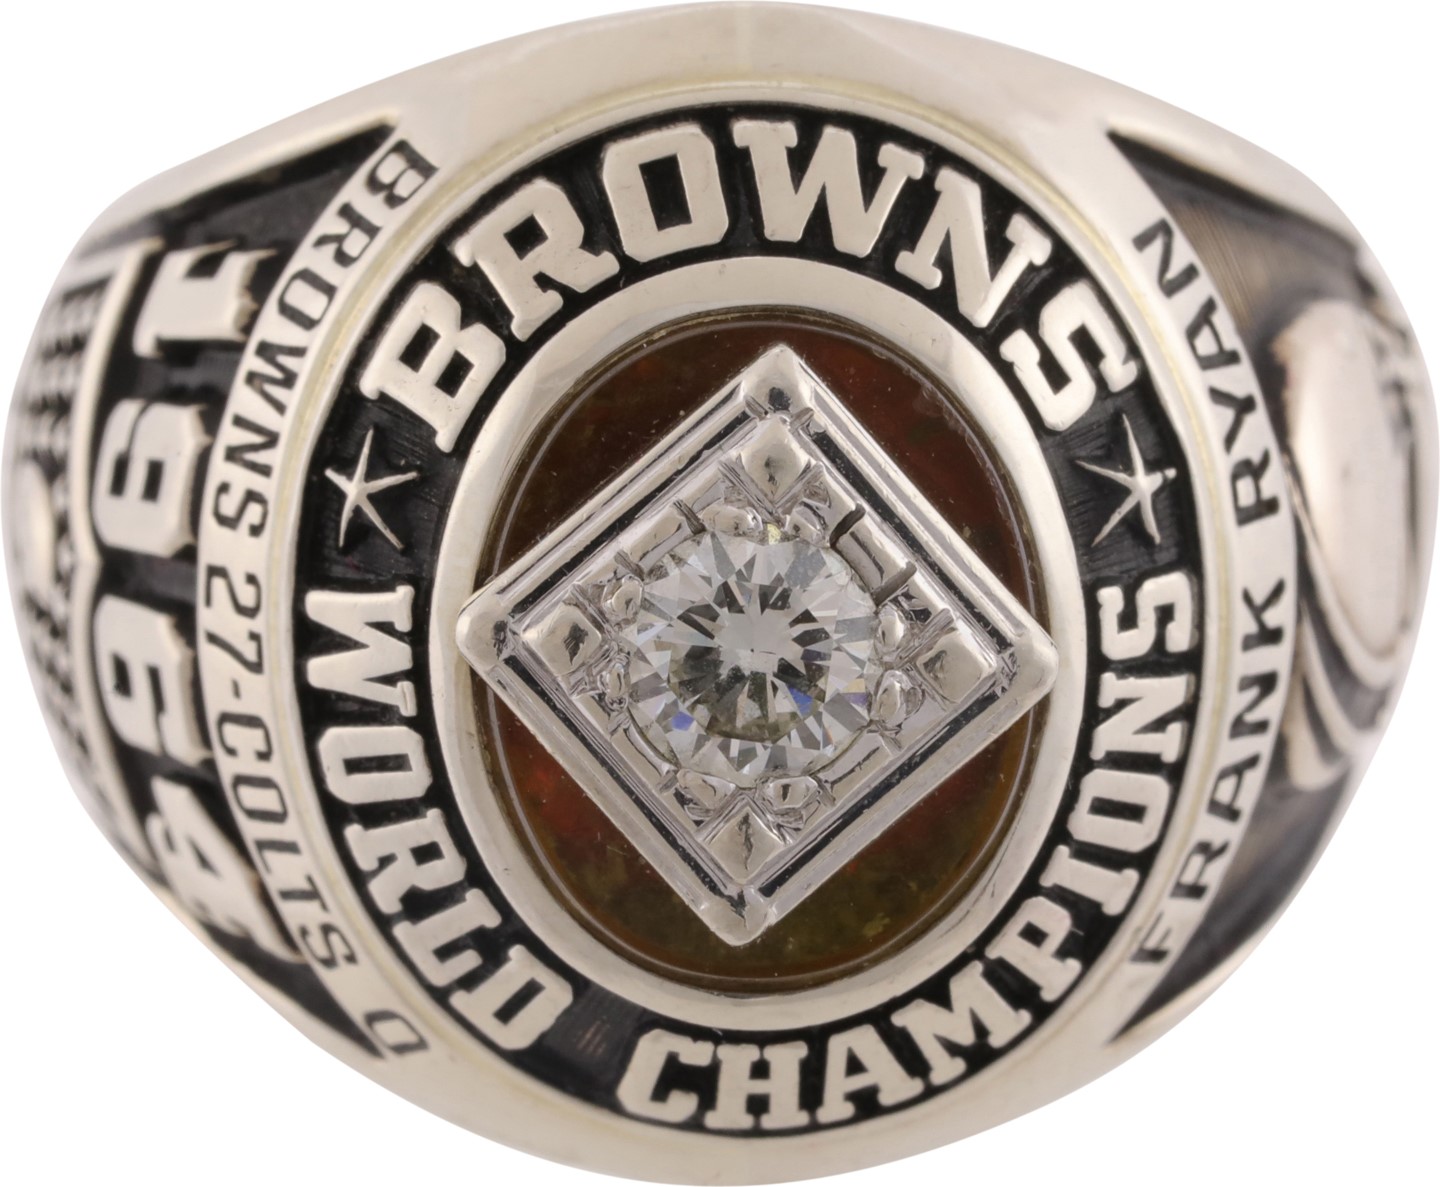 The Frank Ryan Collection - 1964 Cleveland Browns NFL Championship Ring Presented to Quarterback Frank Ryan